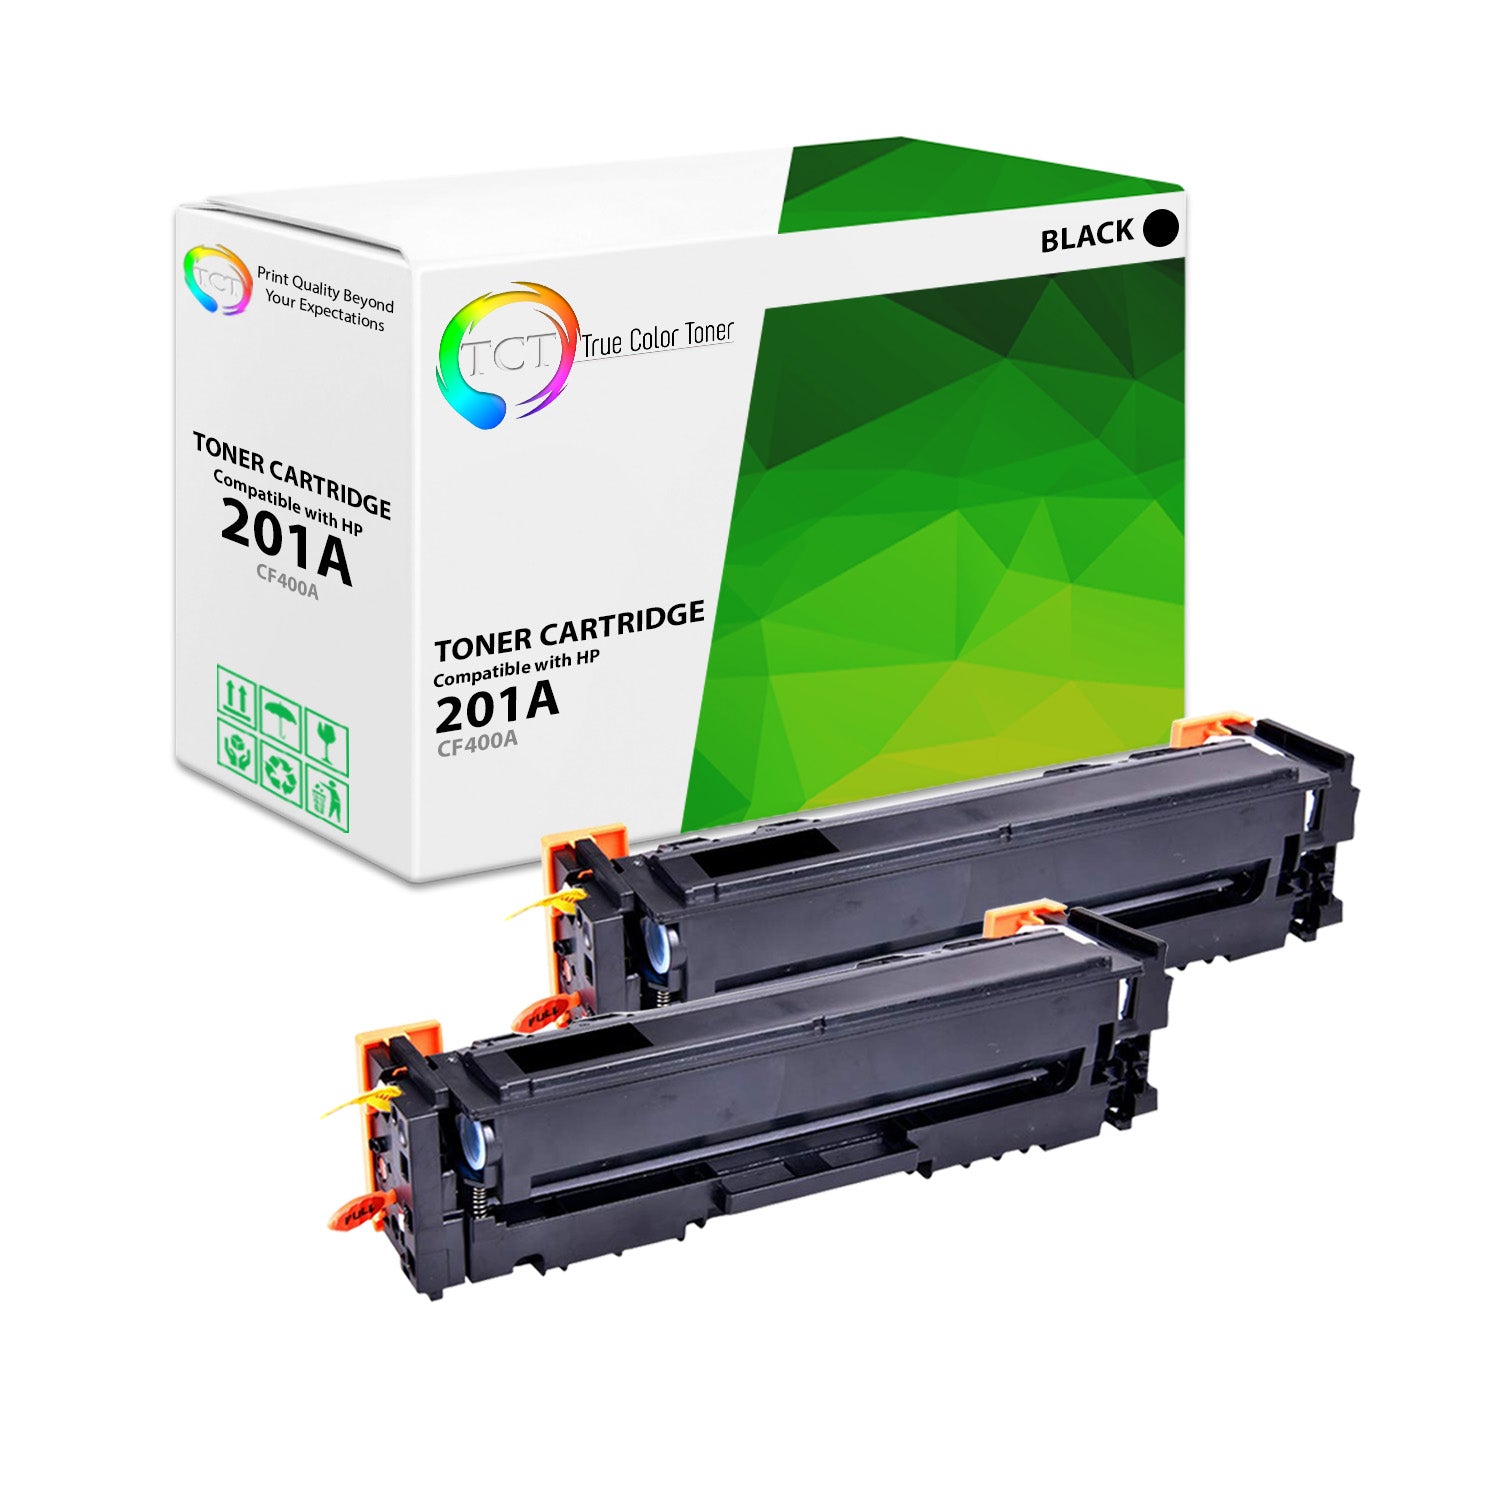 TCT Compatible Toner Cartridge Replacement for the HP 201A Series - 2 Pack Black